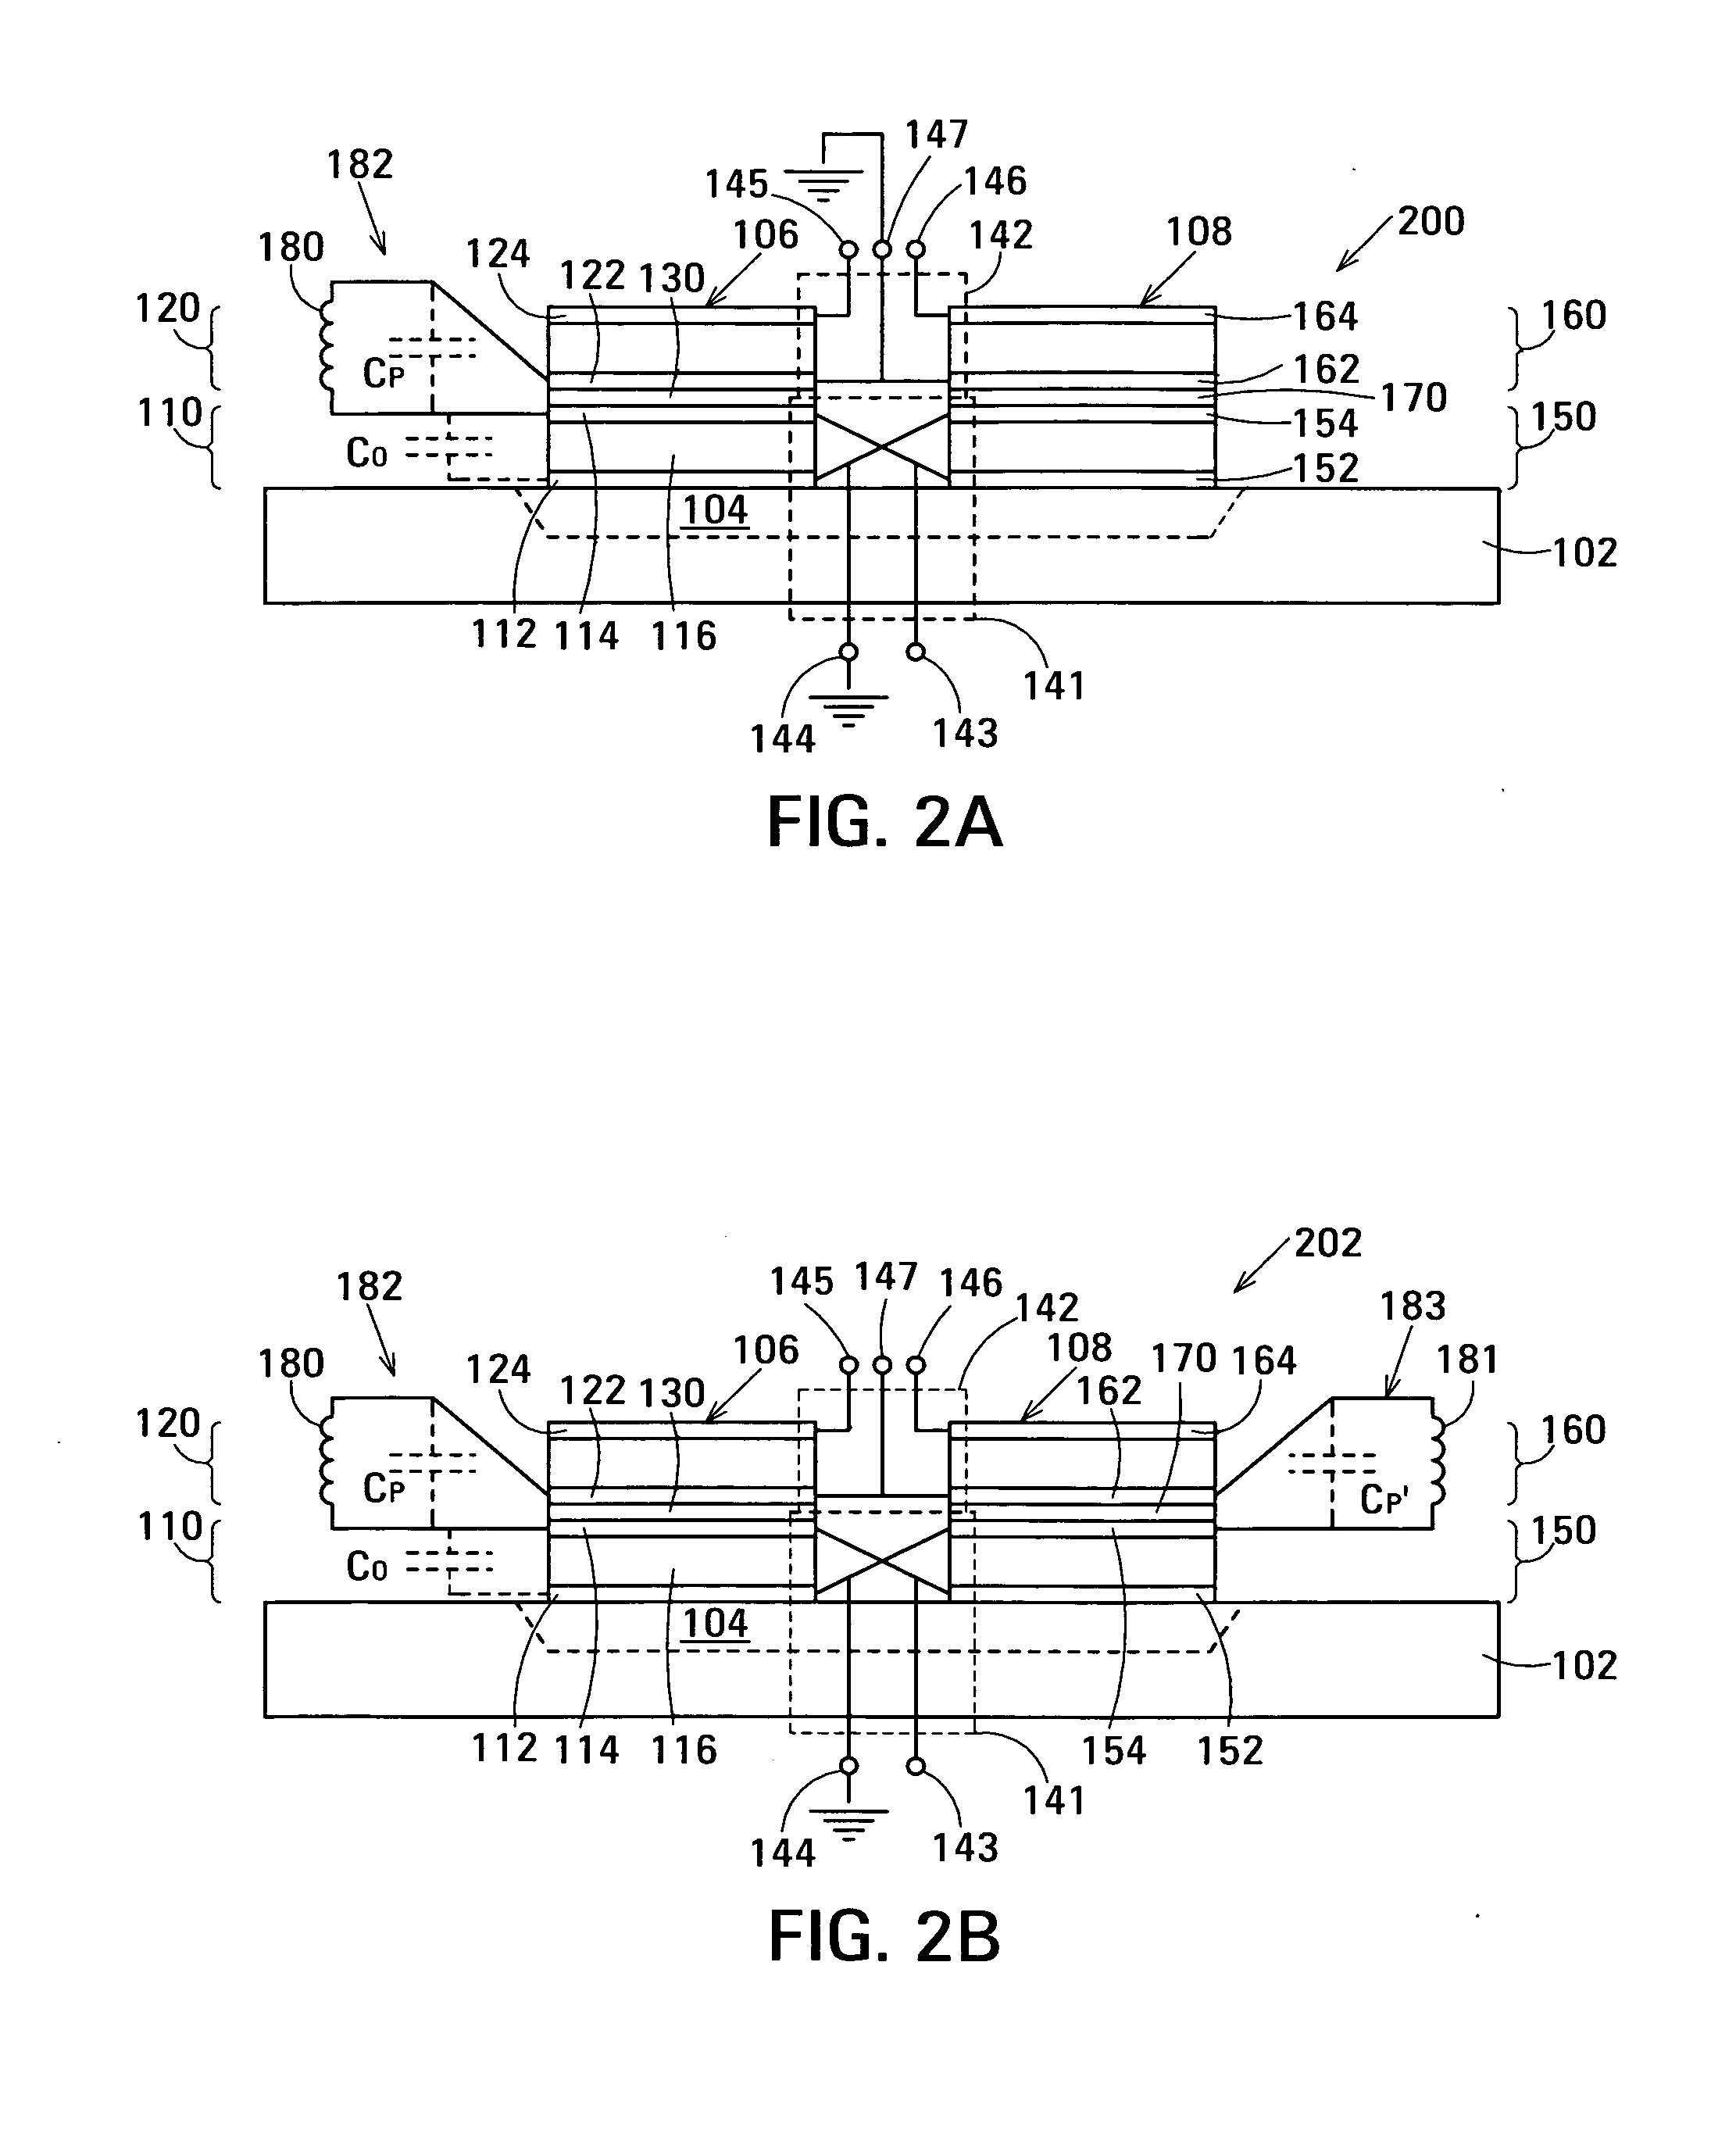 Film acoustically-coupled transformer with increased common mode rejection